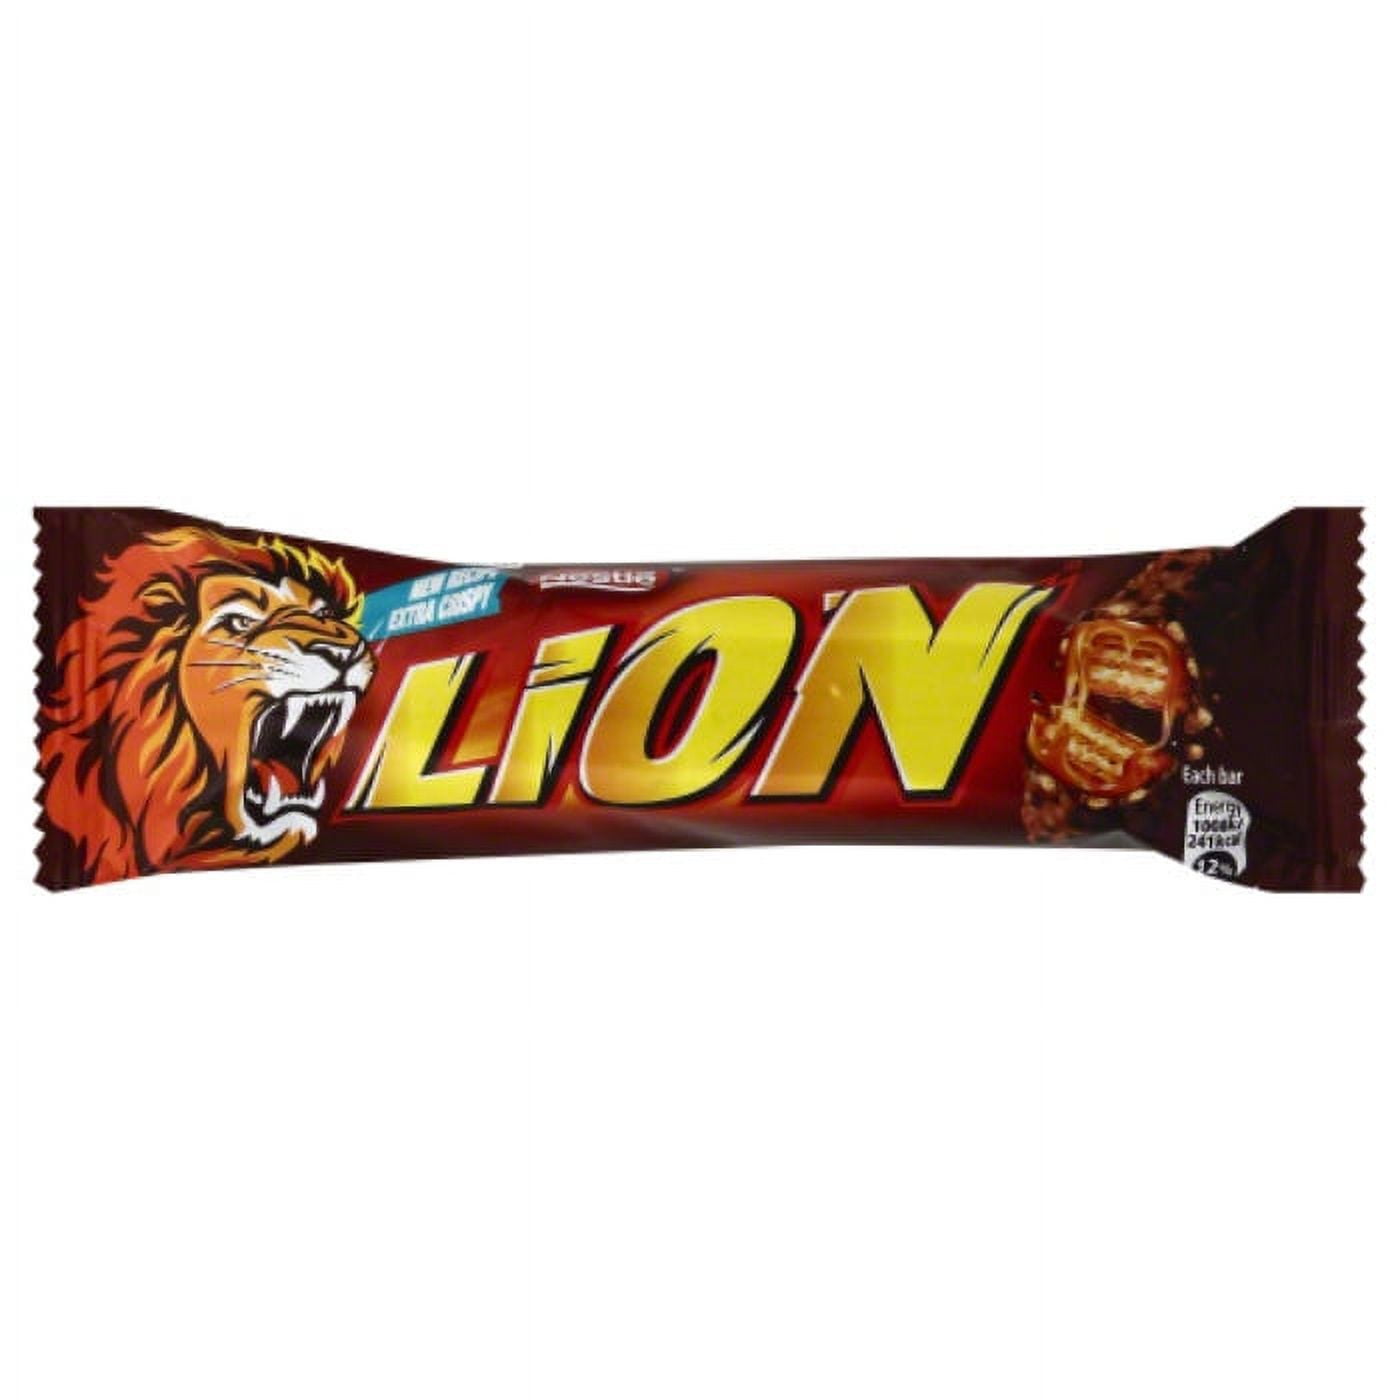 Original Lion Chocolate Bars Candy Pack Imported From The UK England Filled  Wafer With Caramel And Cereals Covered With Milk Chocolate The Very Best